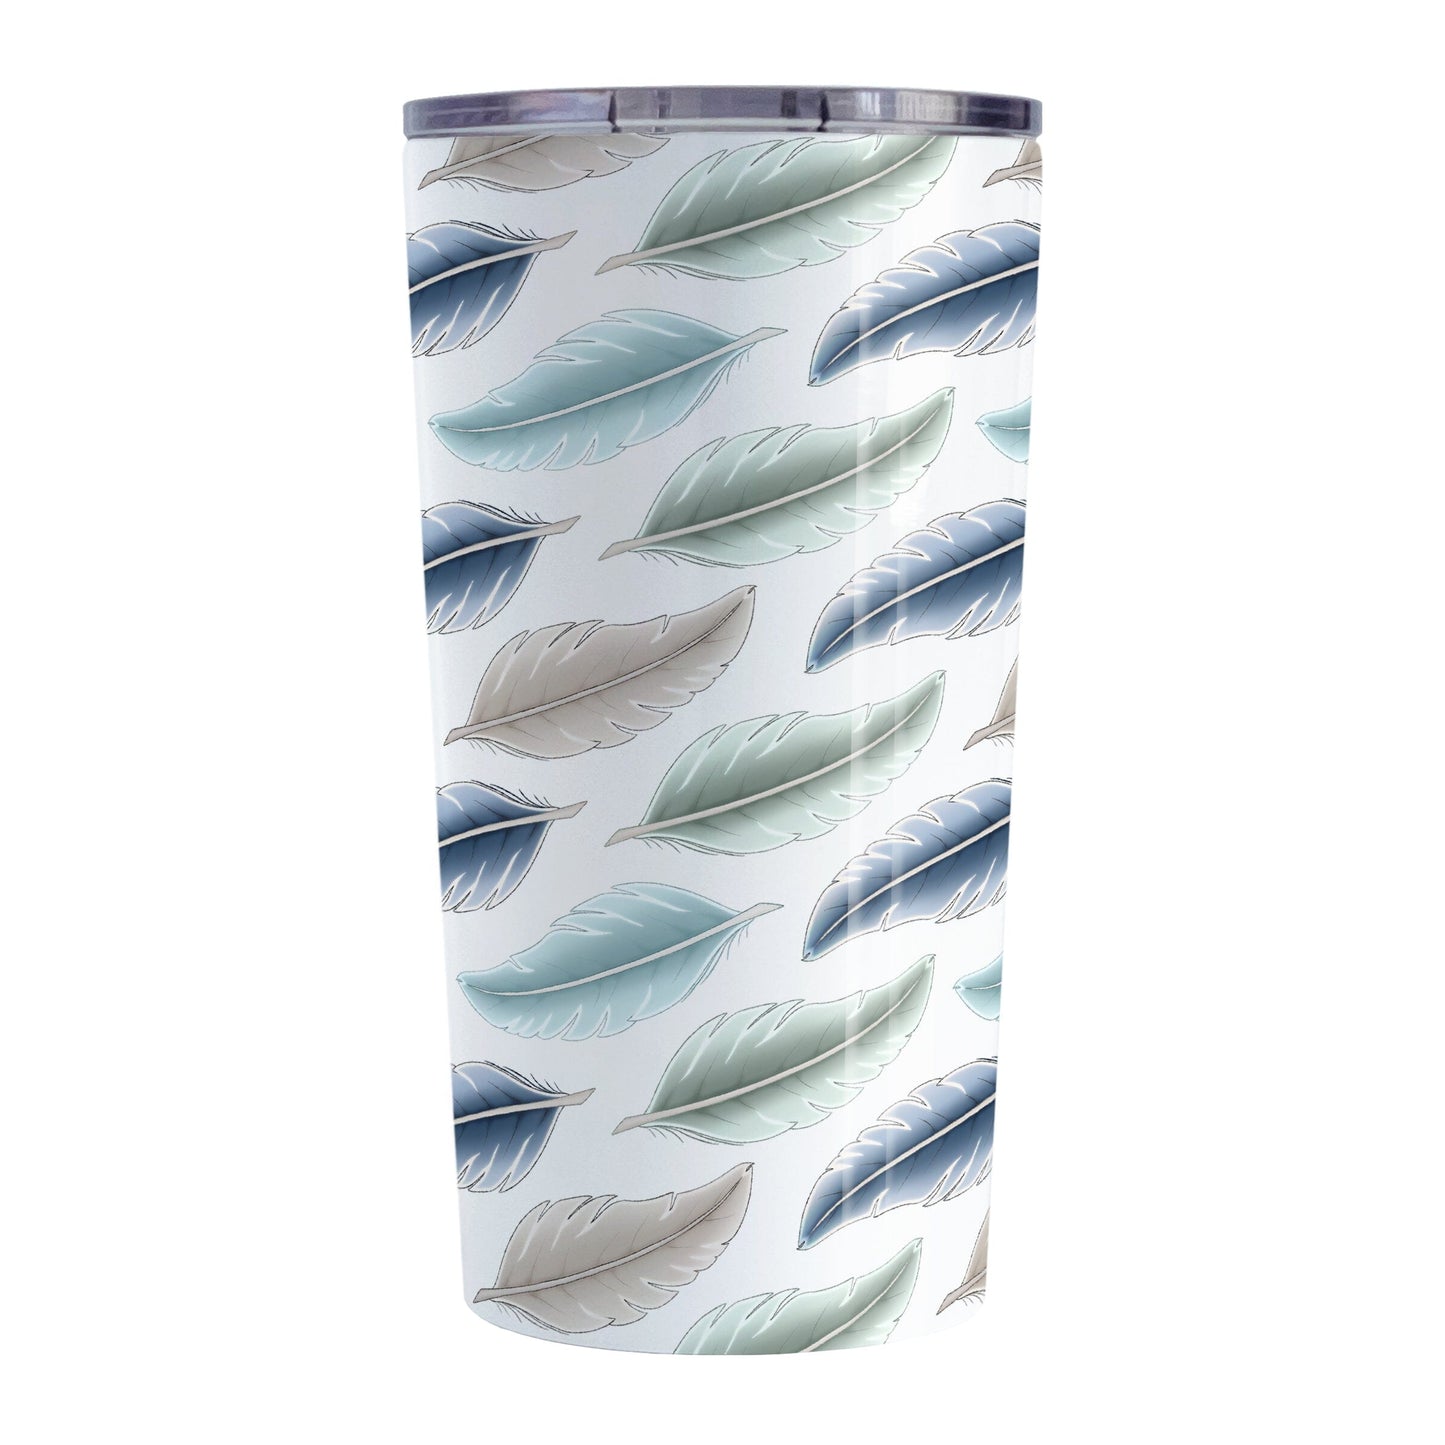 Coastal Feathers Tumbler Cup (20oz) at Amy's Coffee Mugs. A stainless steel tumbler cup designed with a pattern of feathers in a coastal color scheme that wraps around the cup.